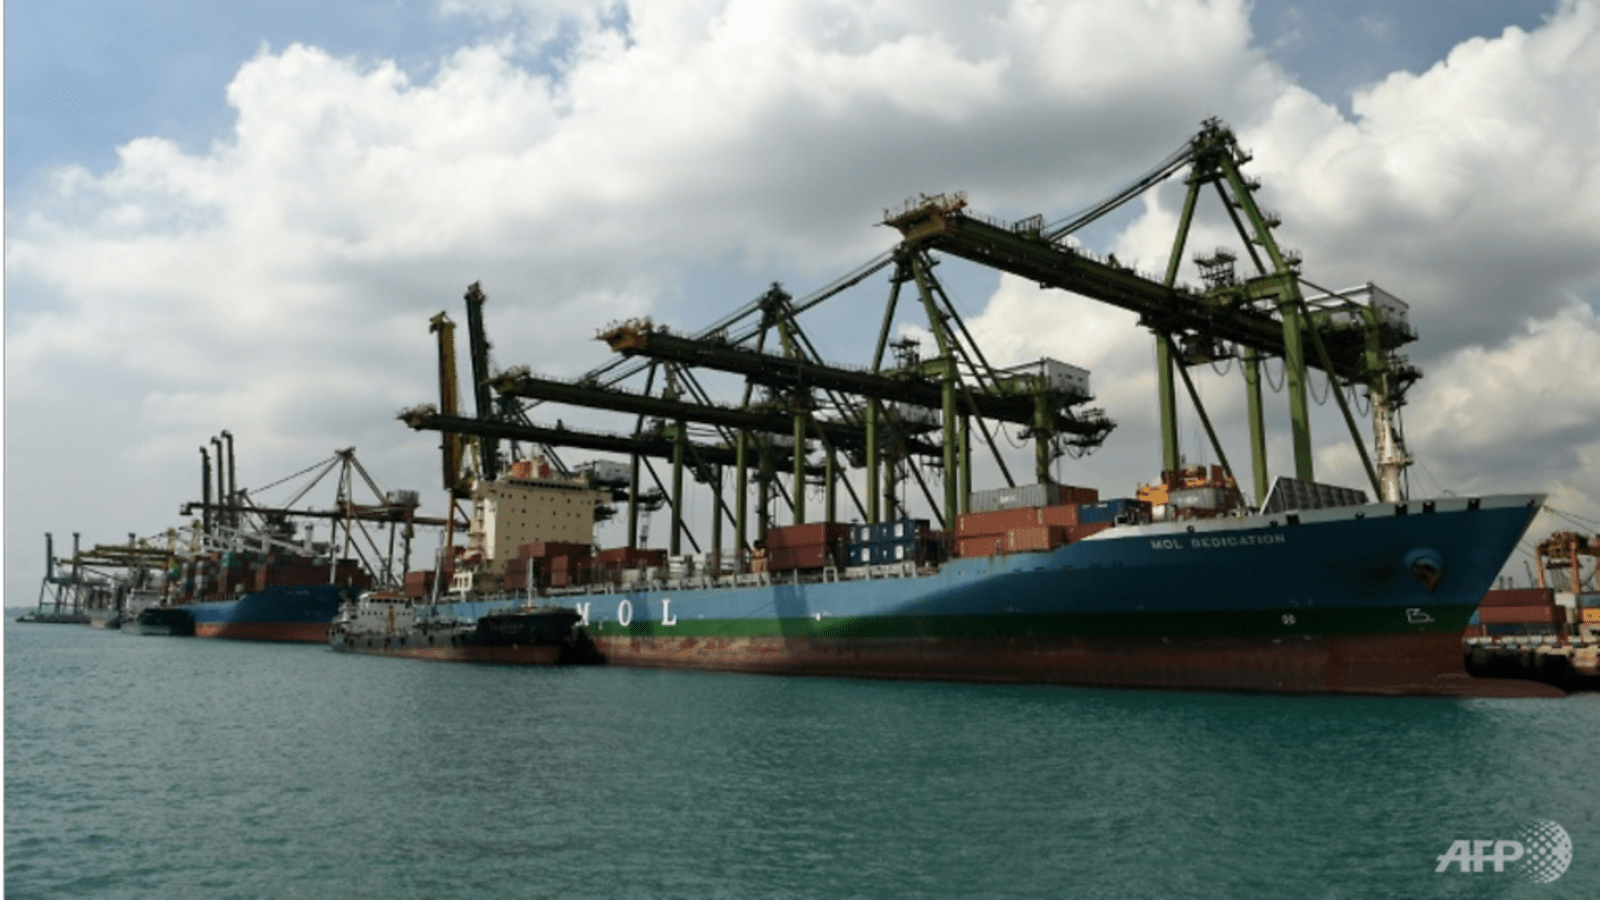 less-polluting-harbour-craft-to-have-singapore-port-dues-waived-for-five-years:-iswaran